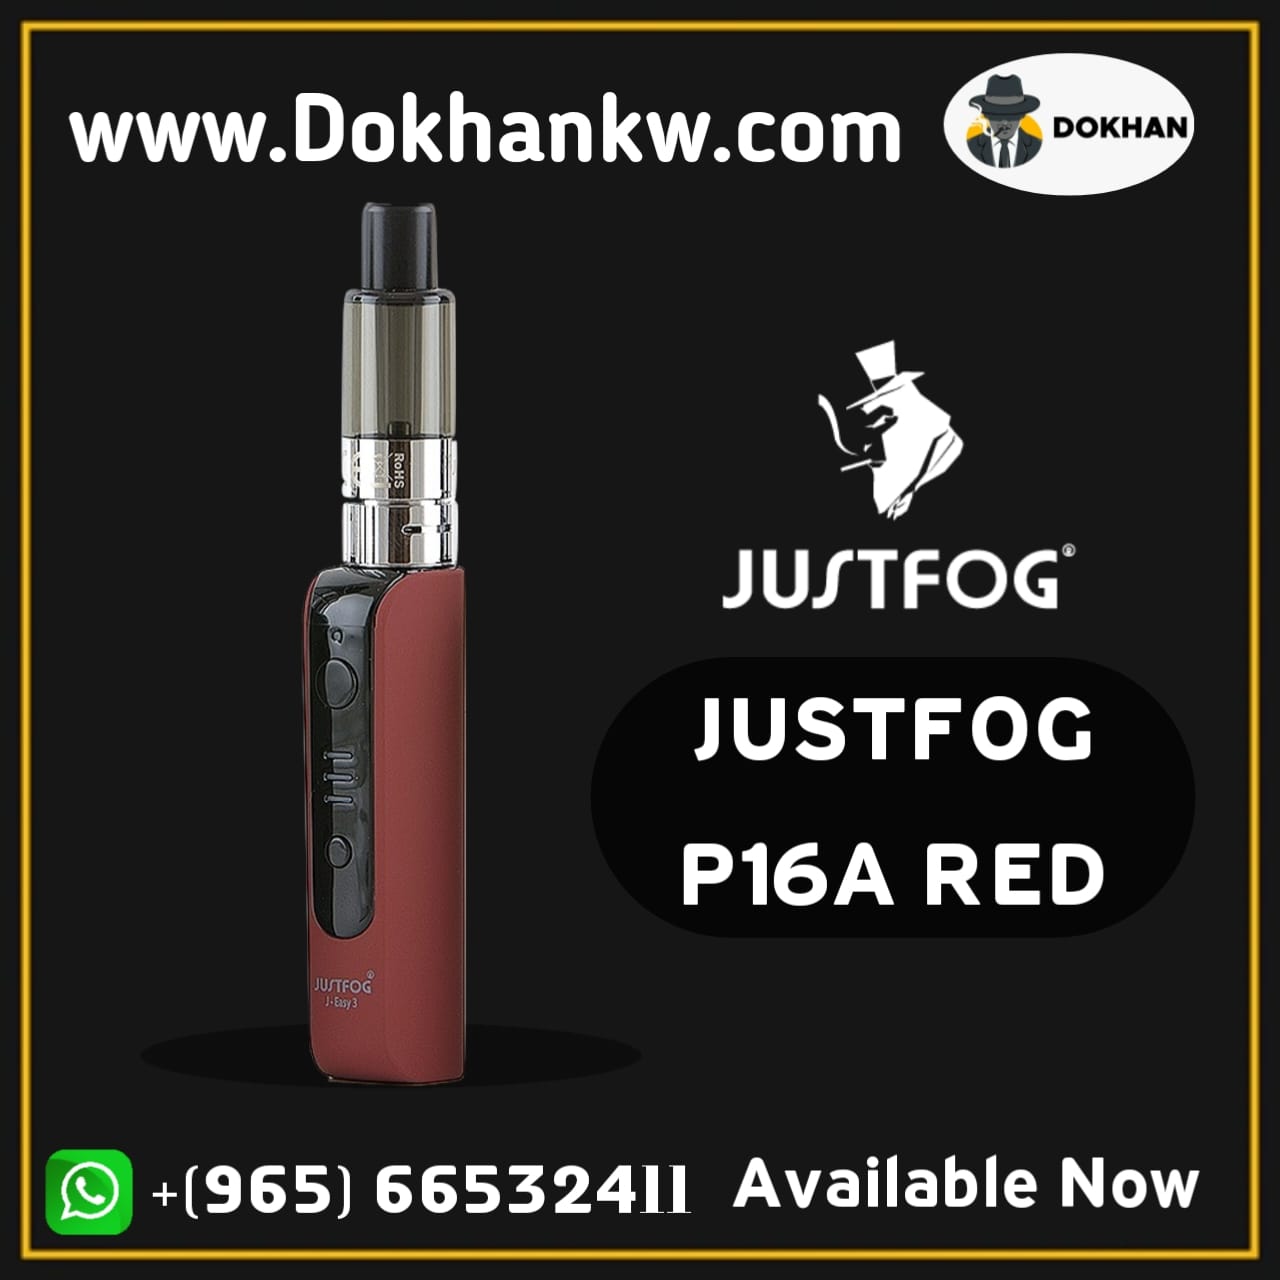 JUSTFOG P16A RED